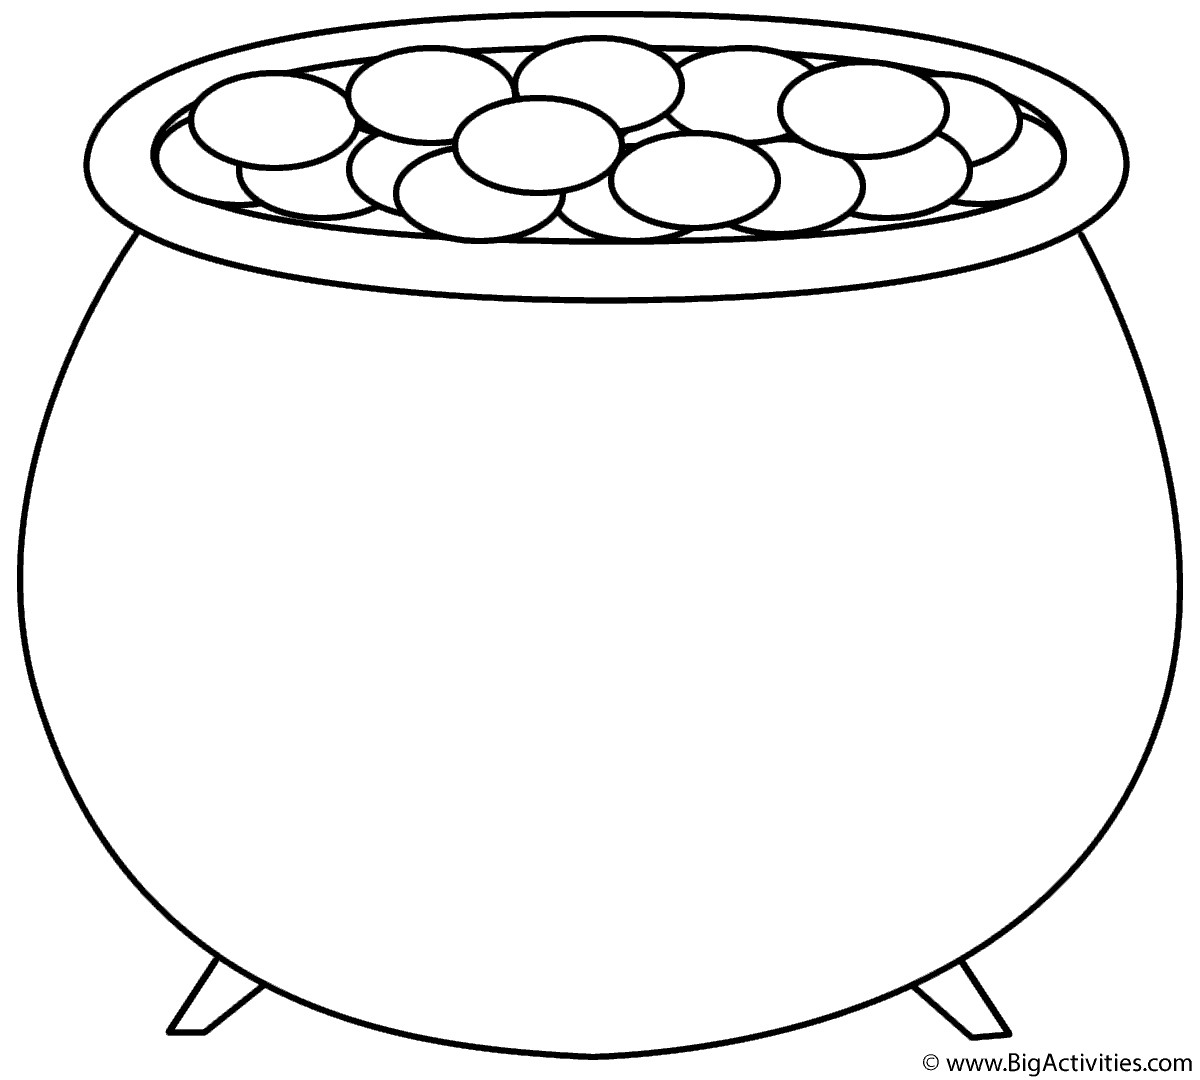 Pot of Gold - Coloring Page (St. Patrick's Day)